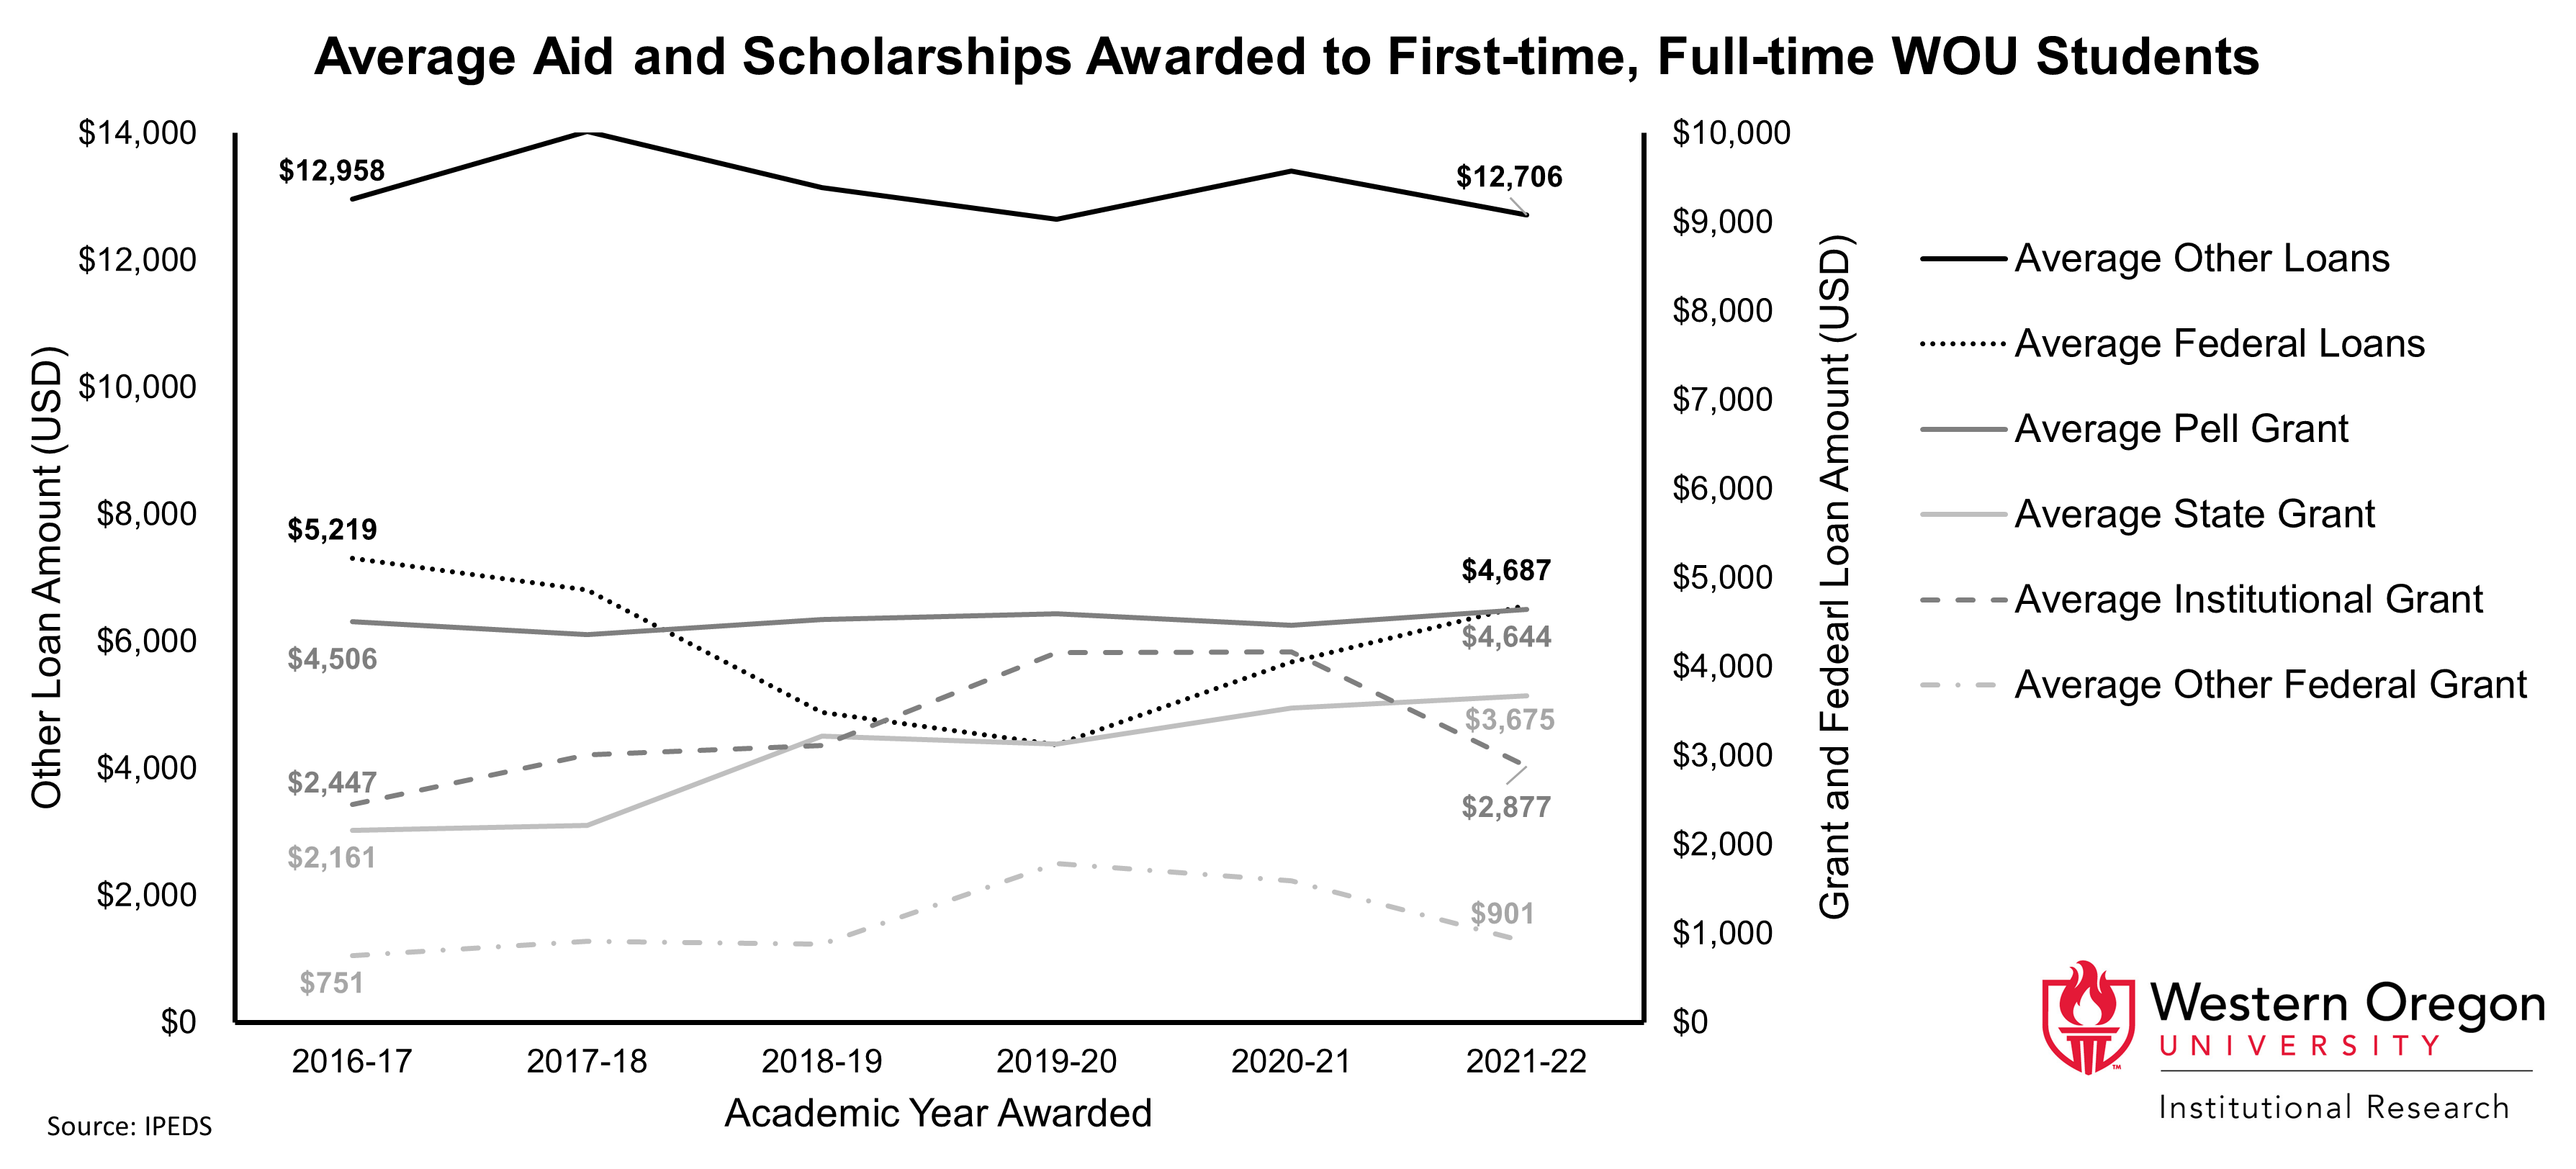 Line graph of average aid and scholarships awarded to WOU students from grants, pell grants, federal grants, state grants, institutional grants, and loans from 2017 to 2022